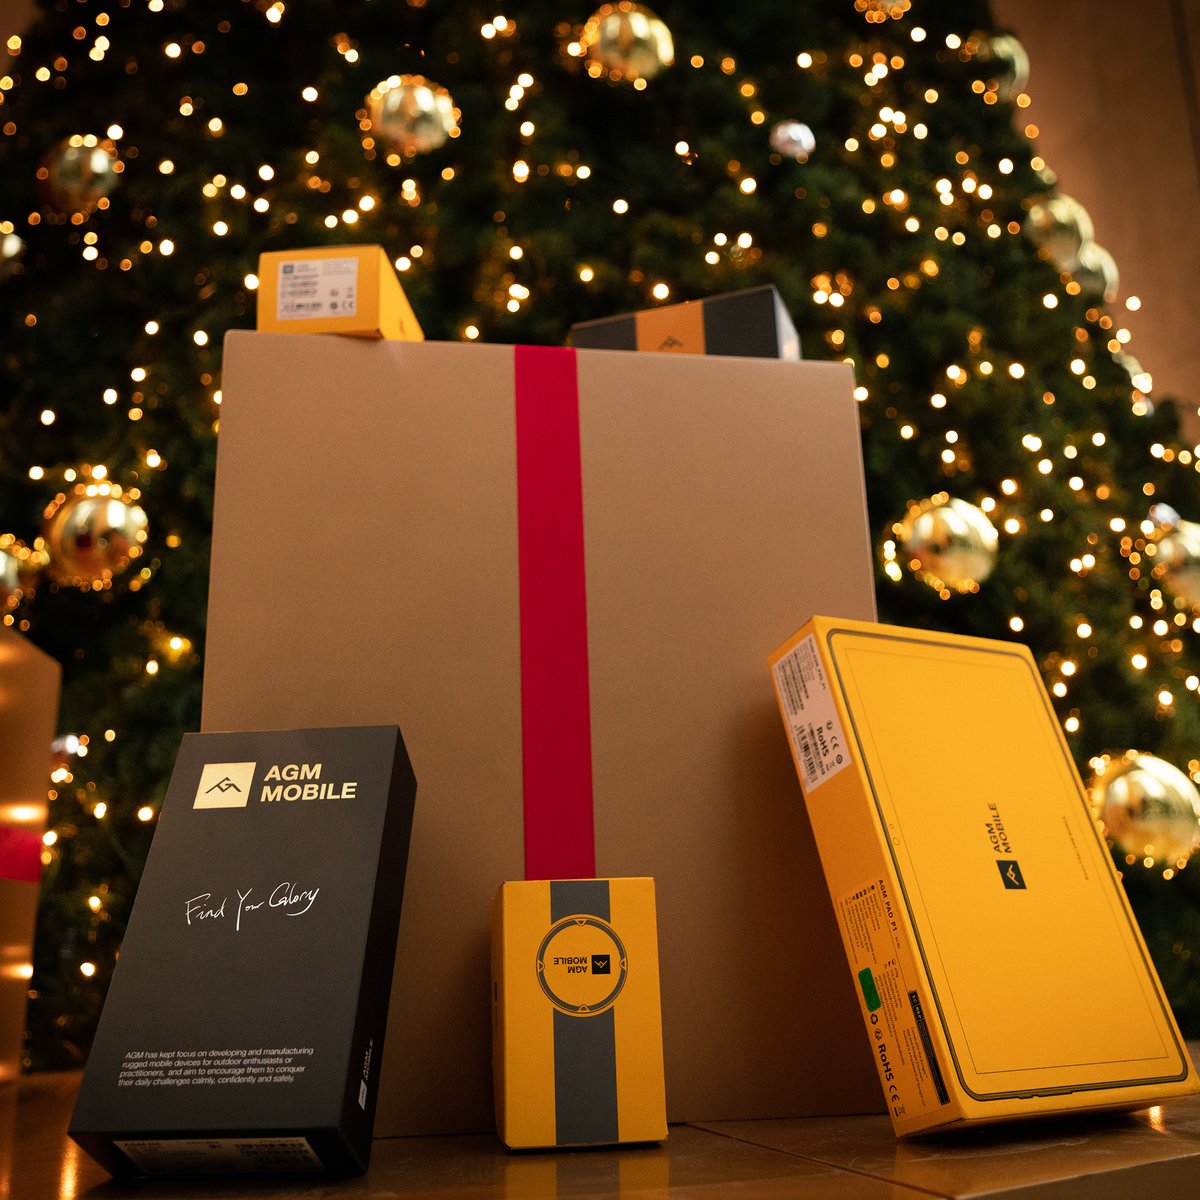 Unwrap connectivity magic! Gift the elegance & durability of AGM Mobile.🎄

Beyond phones, they're memories waiting to be made. Sparkle up your Christmas with exclusive deals! 📱

Hurry—while the cheer's here!🎁

#AGMMobile #ChristmasSale #TechGifts #FestiveOffers #Rugged